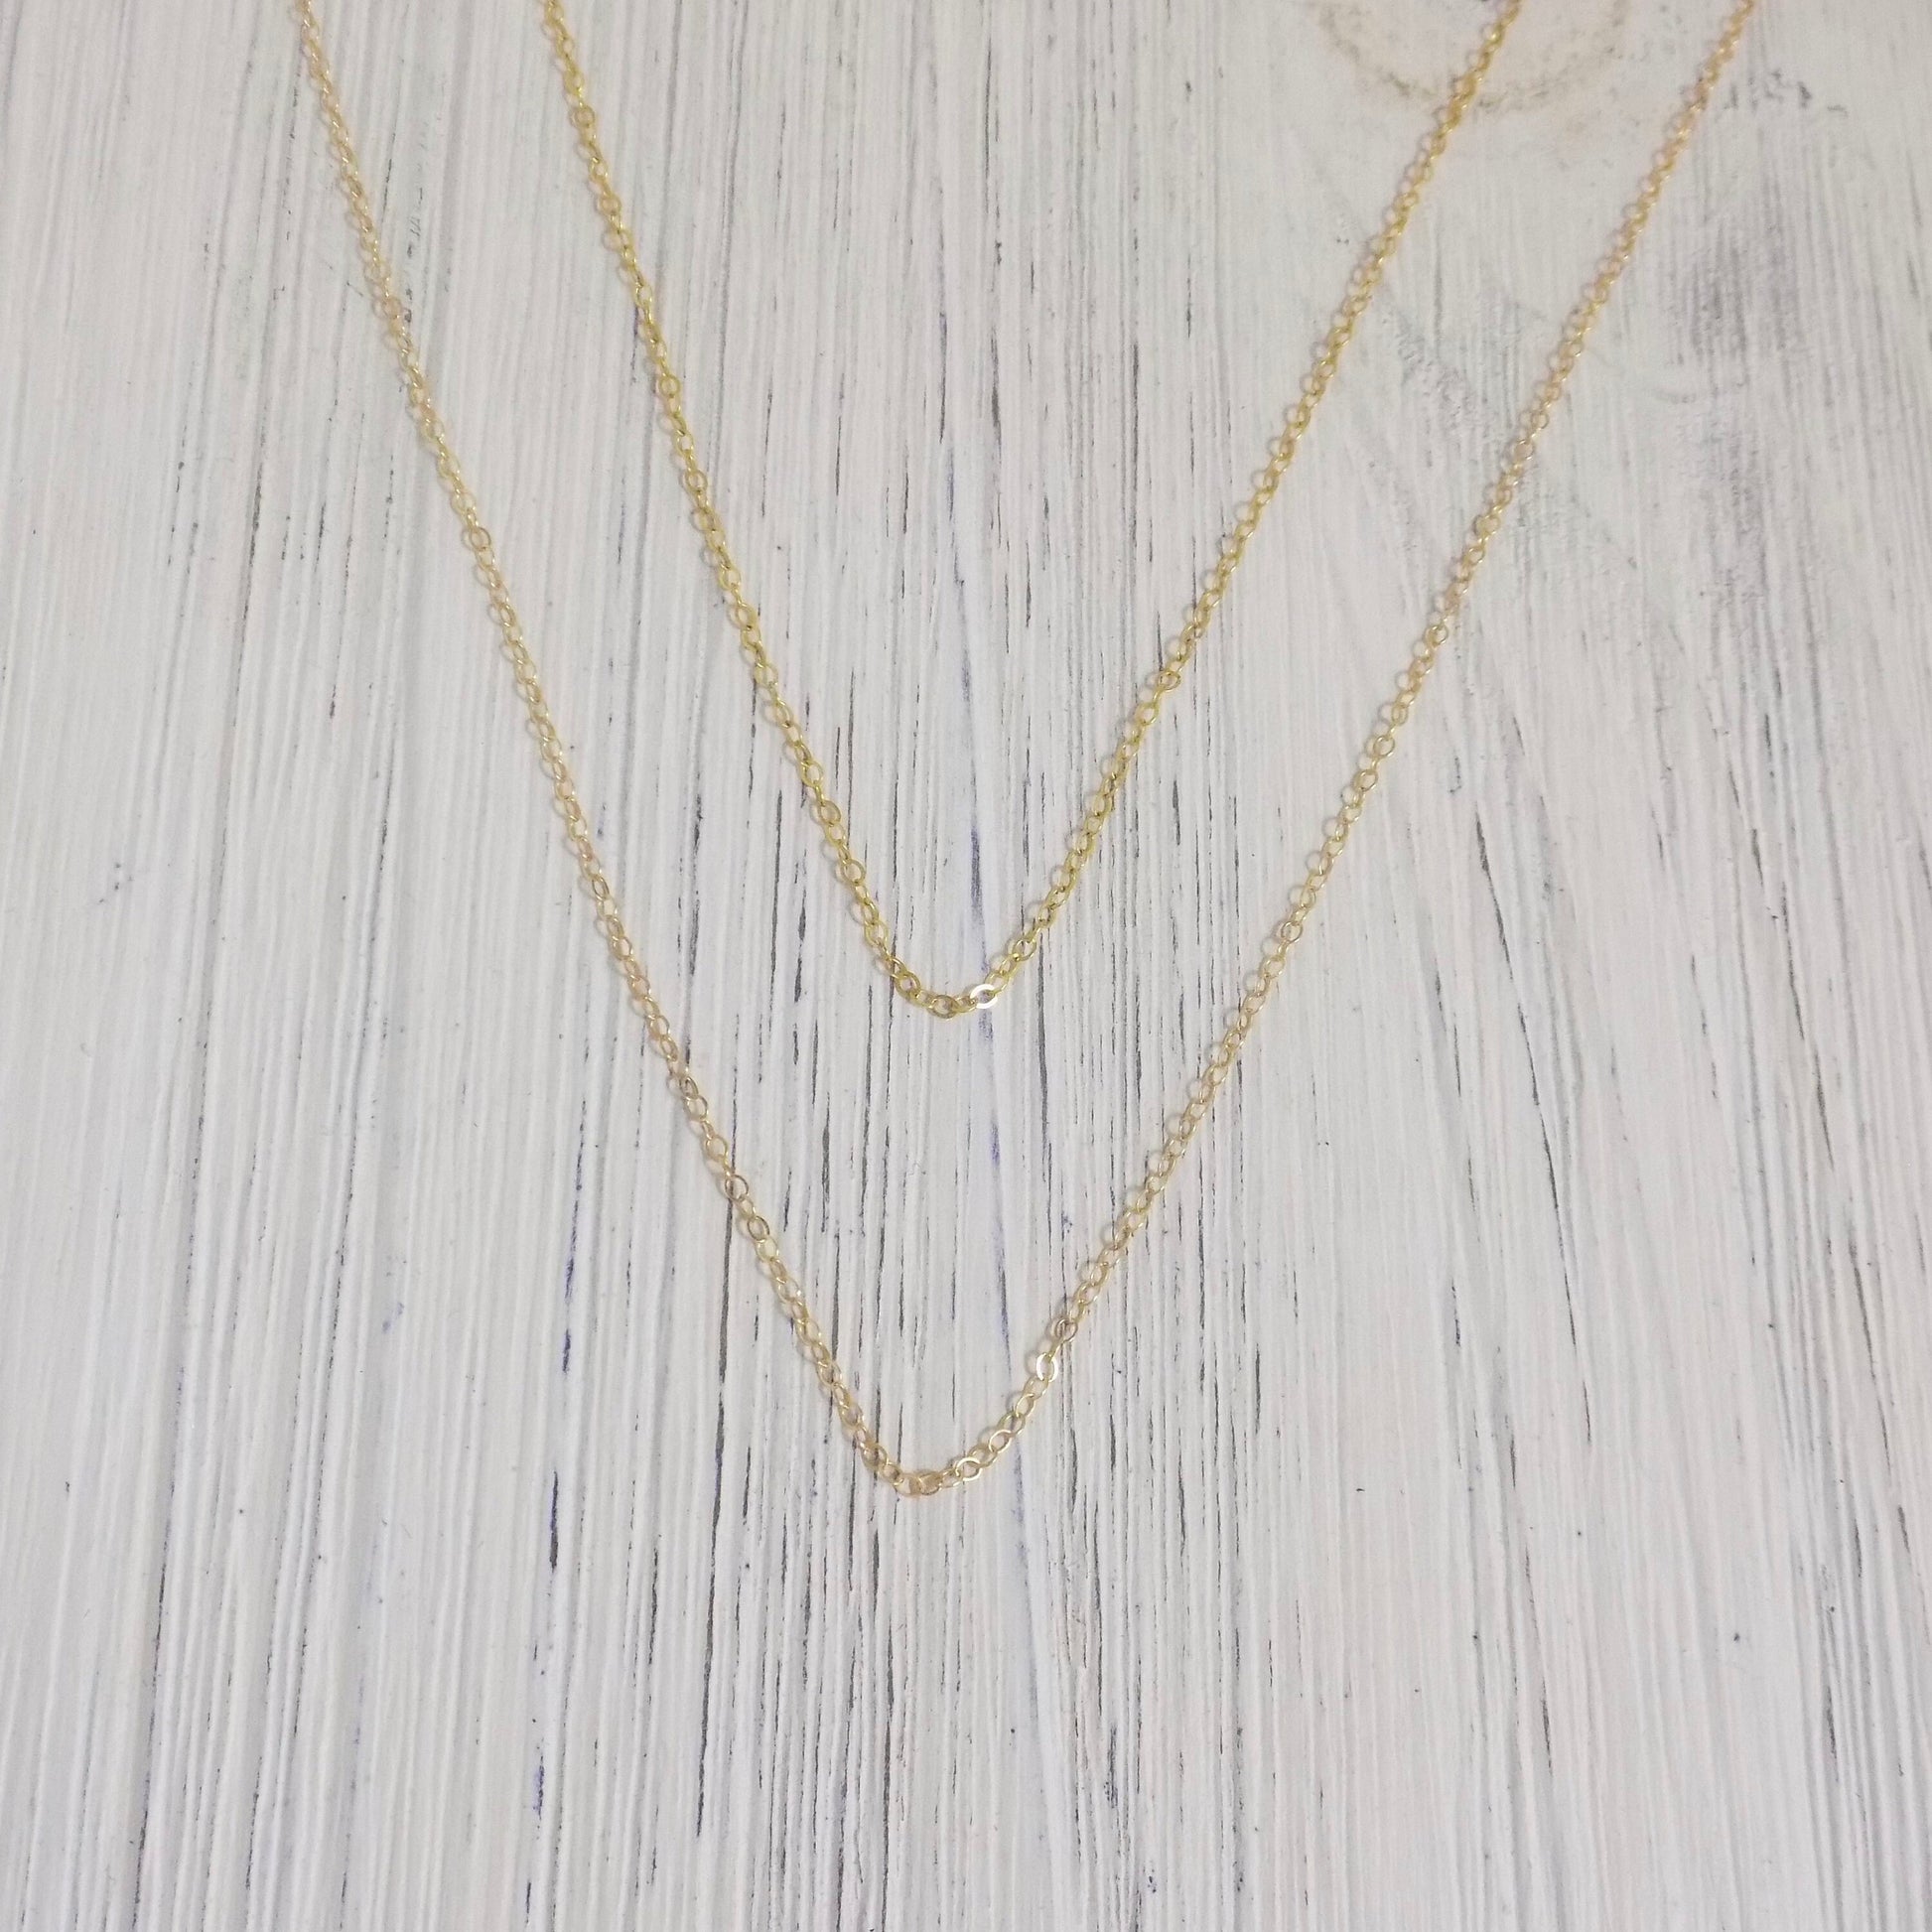 14K Gold Filled Chain Necklace Set - Delicate Gold Layer Necklace Set of 2